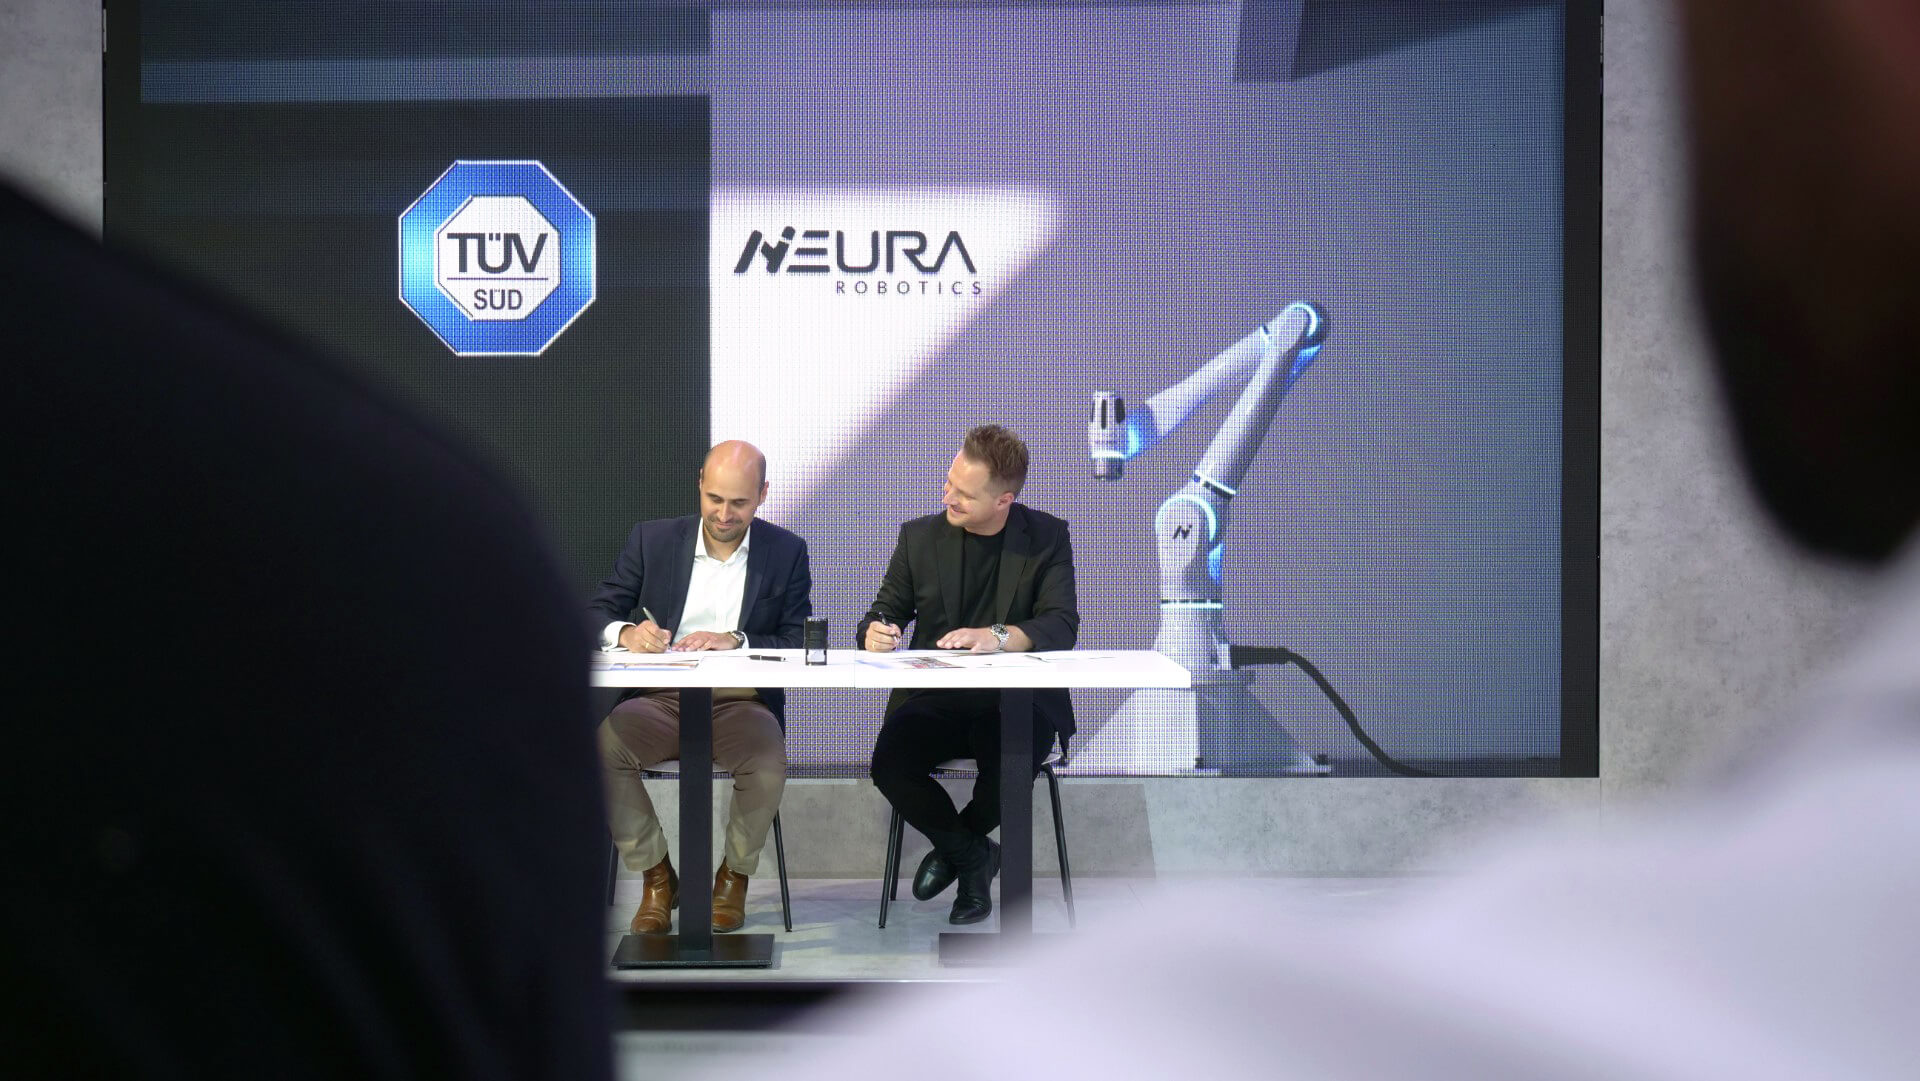 Marcello Walz, Head of Advanced Manufacturing at TÜV SÜD and David Reger, founder and CEO of NEURA Robotics signing the partnership